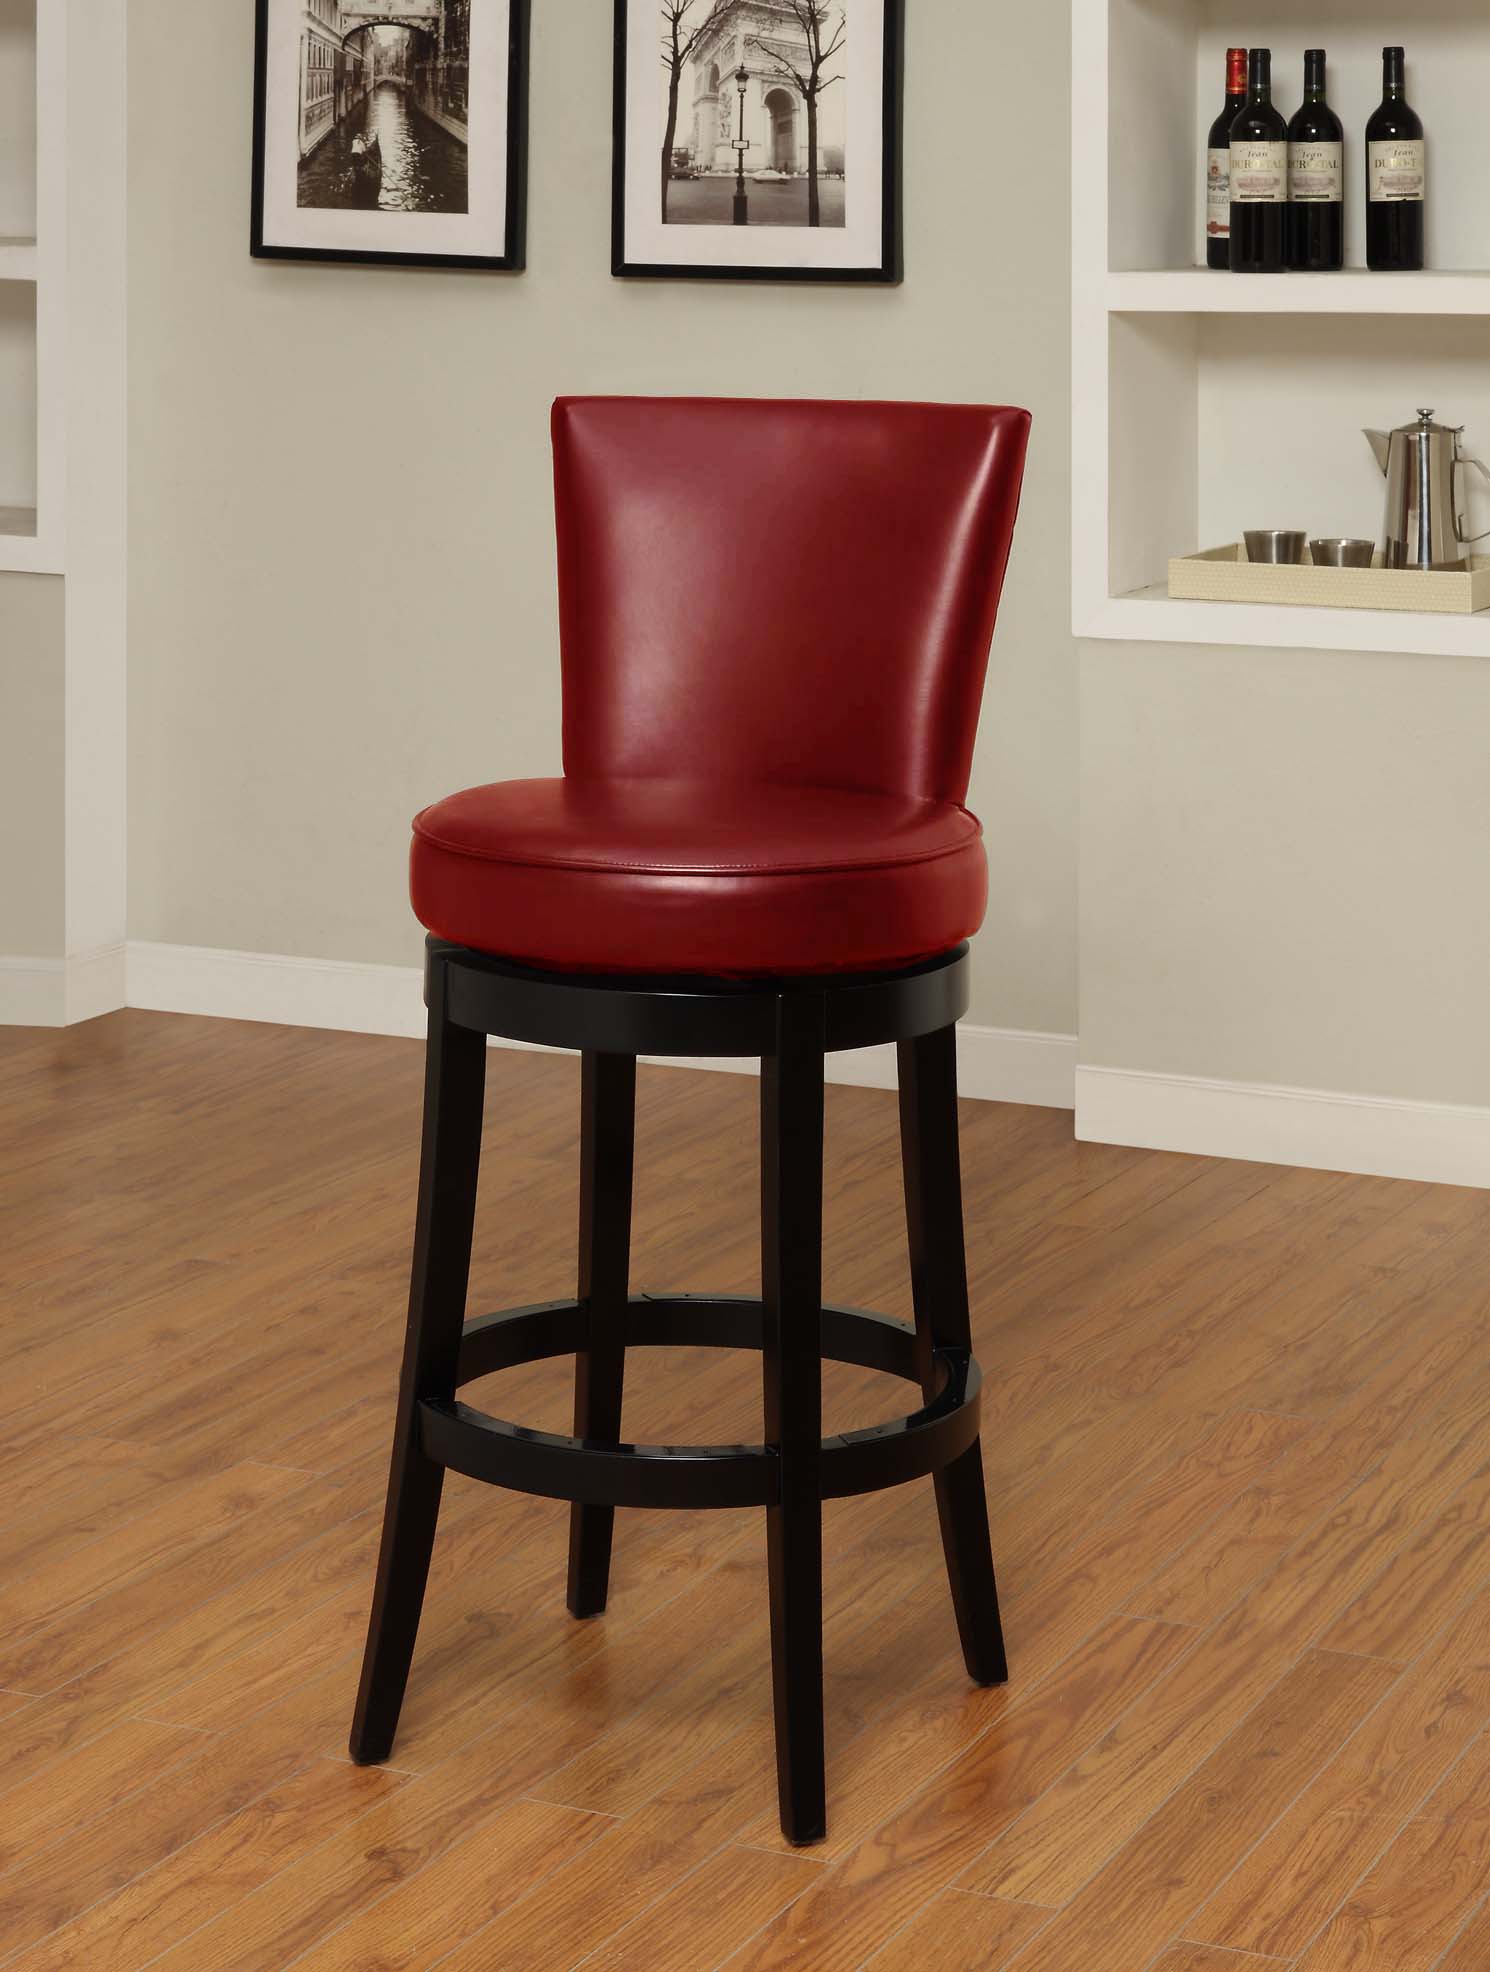 Armen Boston swivel barstool in red bicast leather 30" seat height